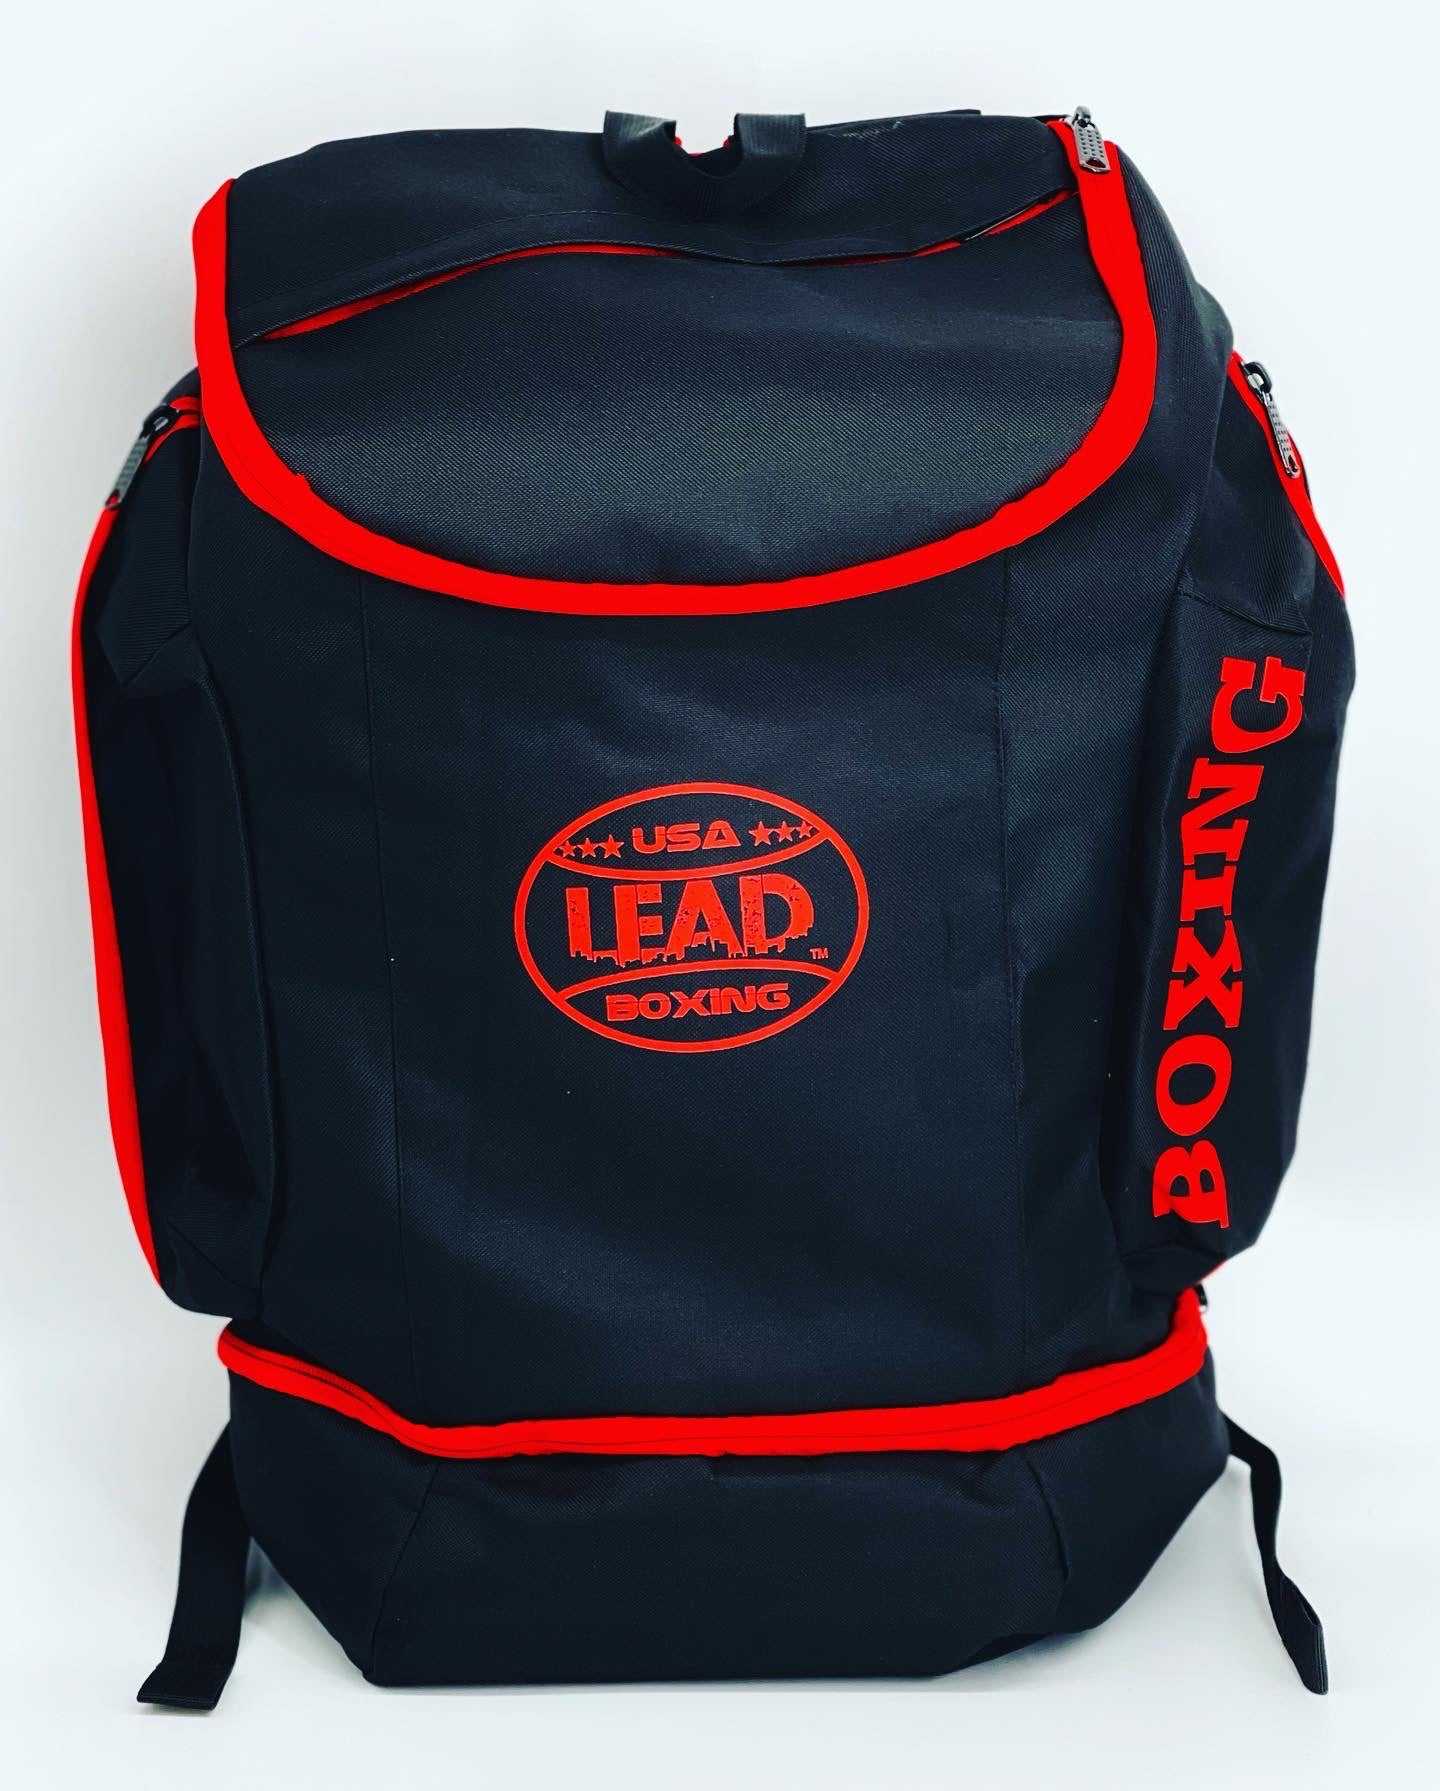 LEAD BOXING Backpack Large  (Black - Red)